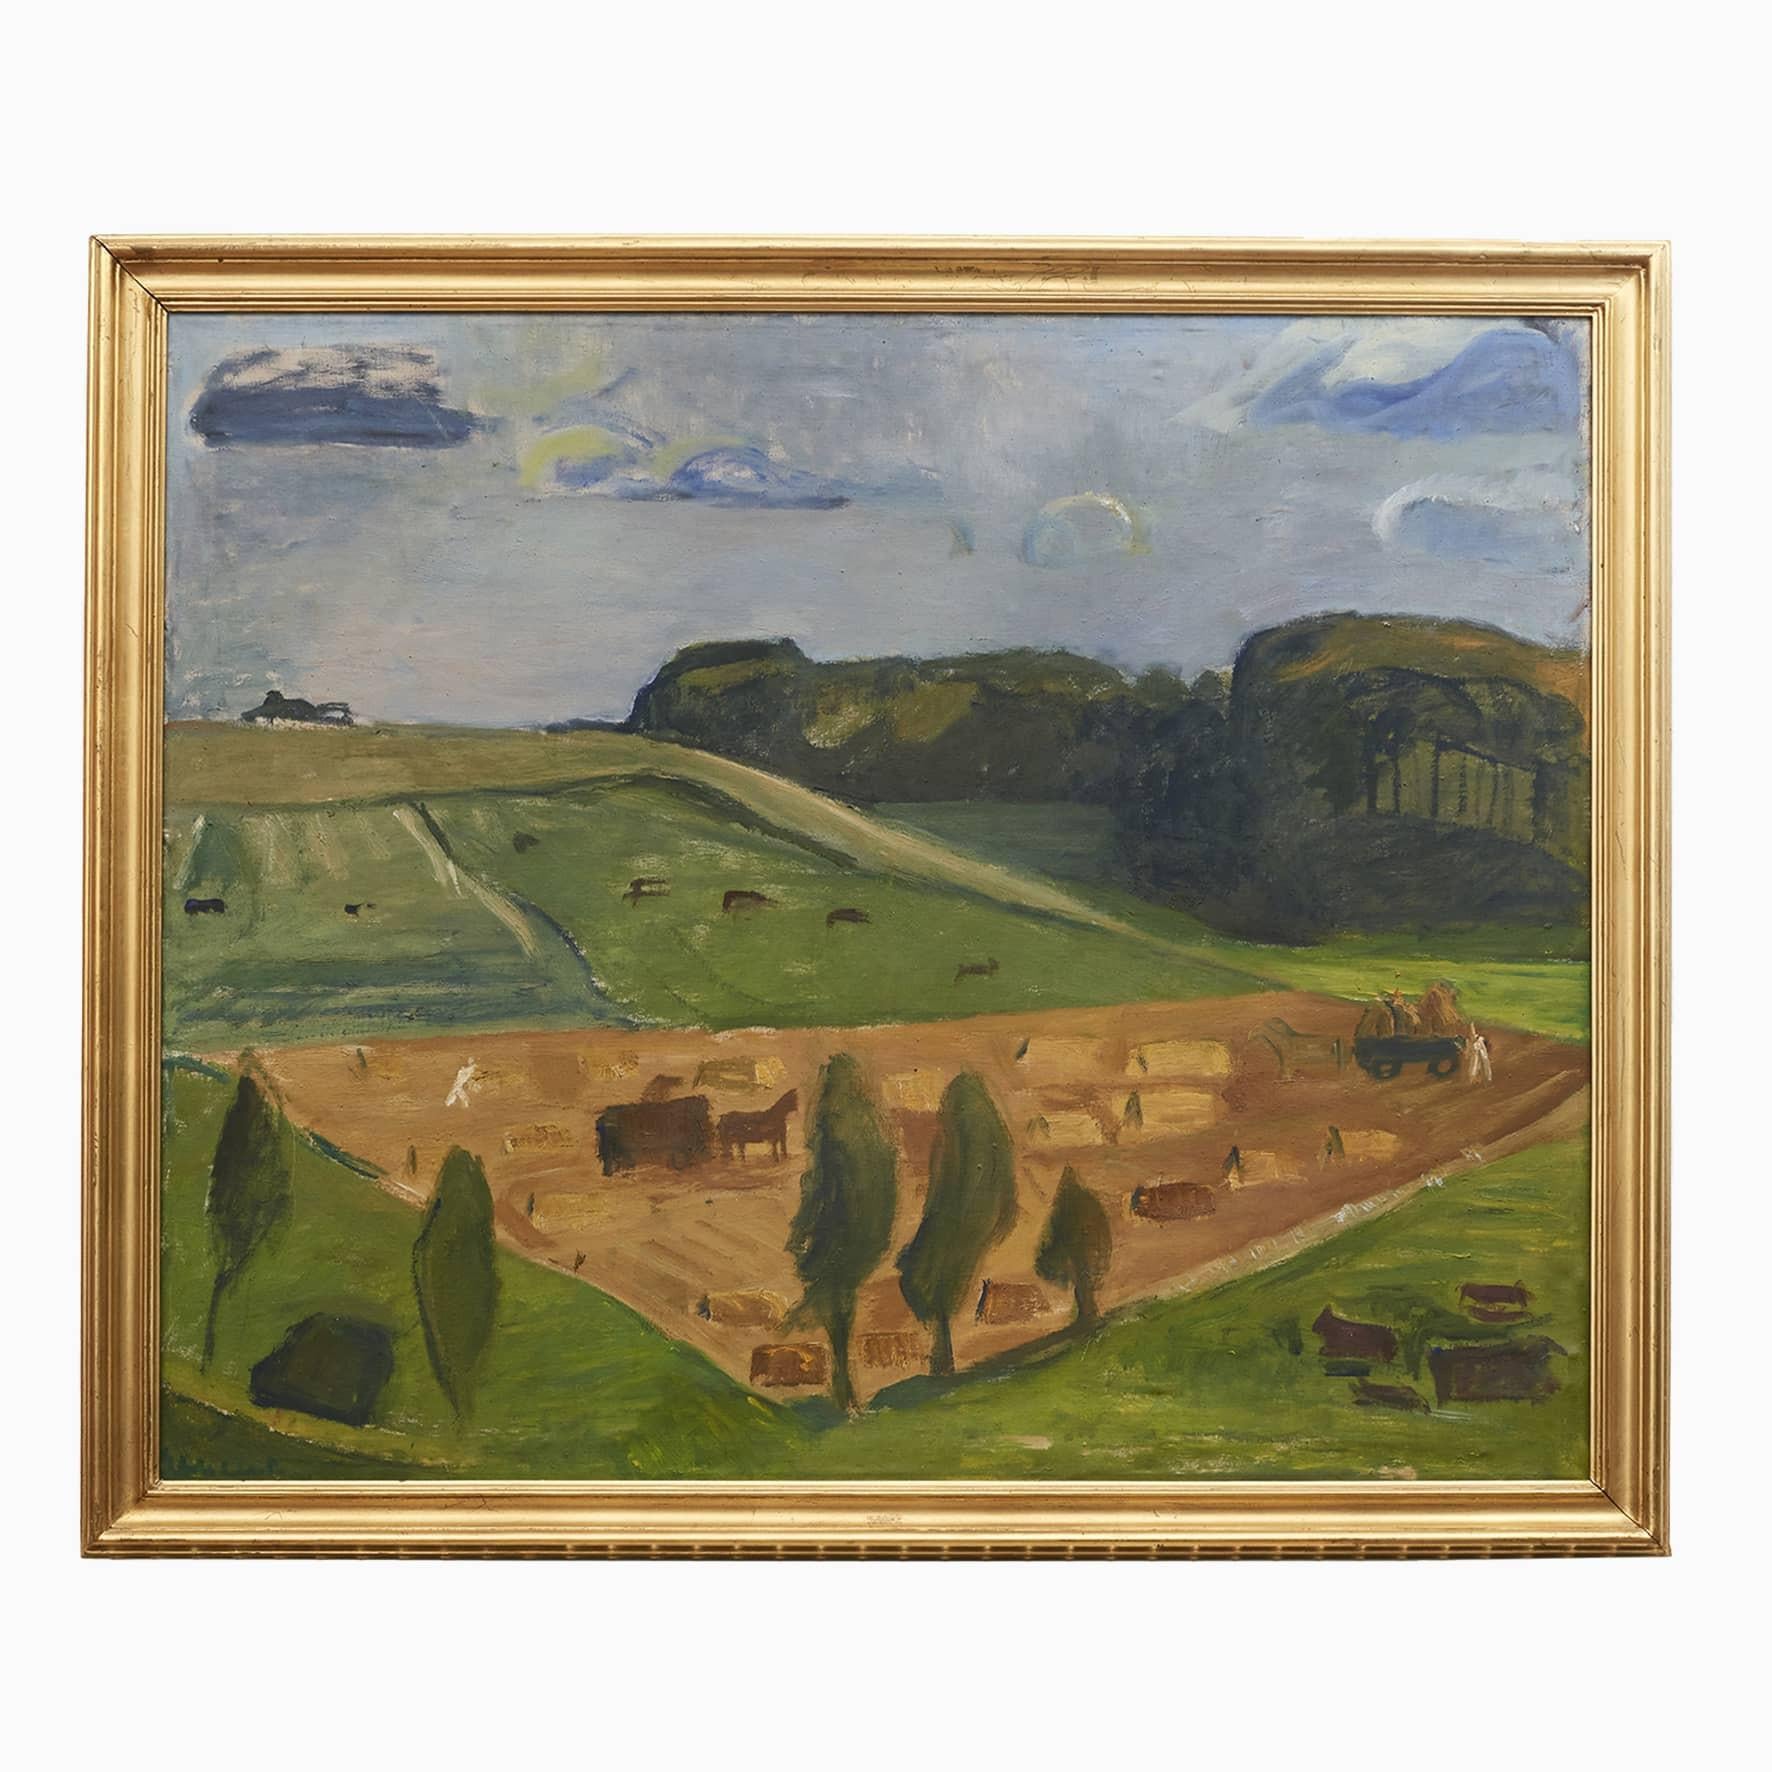 Ebba Carstensen, Danish painter 1885 - 1967.
Landscape, oil on canvas.

Gilded wooden frame: 107 x 127 cm - Without frame: 94 x 114 cm.
Signed: Ebba Carstensen 1956

From 1909 to 1913, Ebba Carstensen attended the Royal Danish Academy of Fine